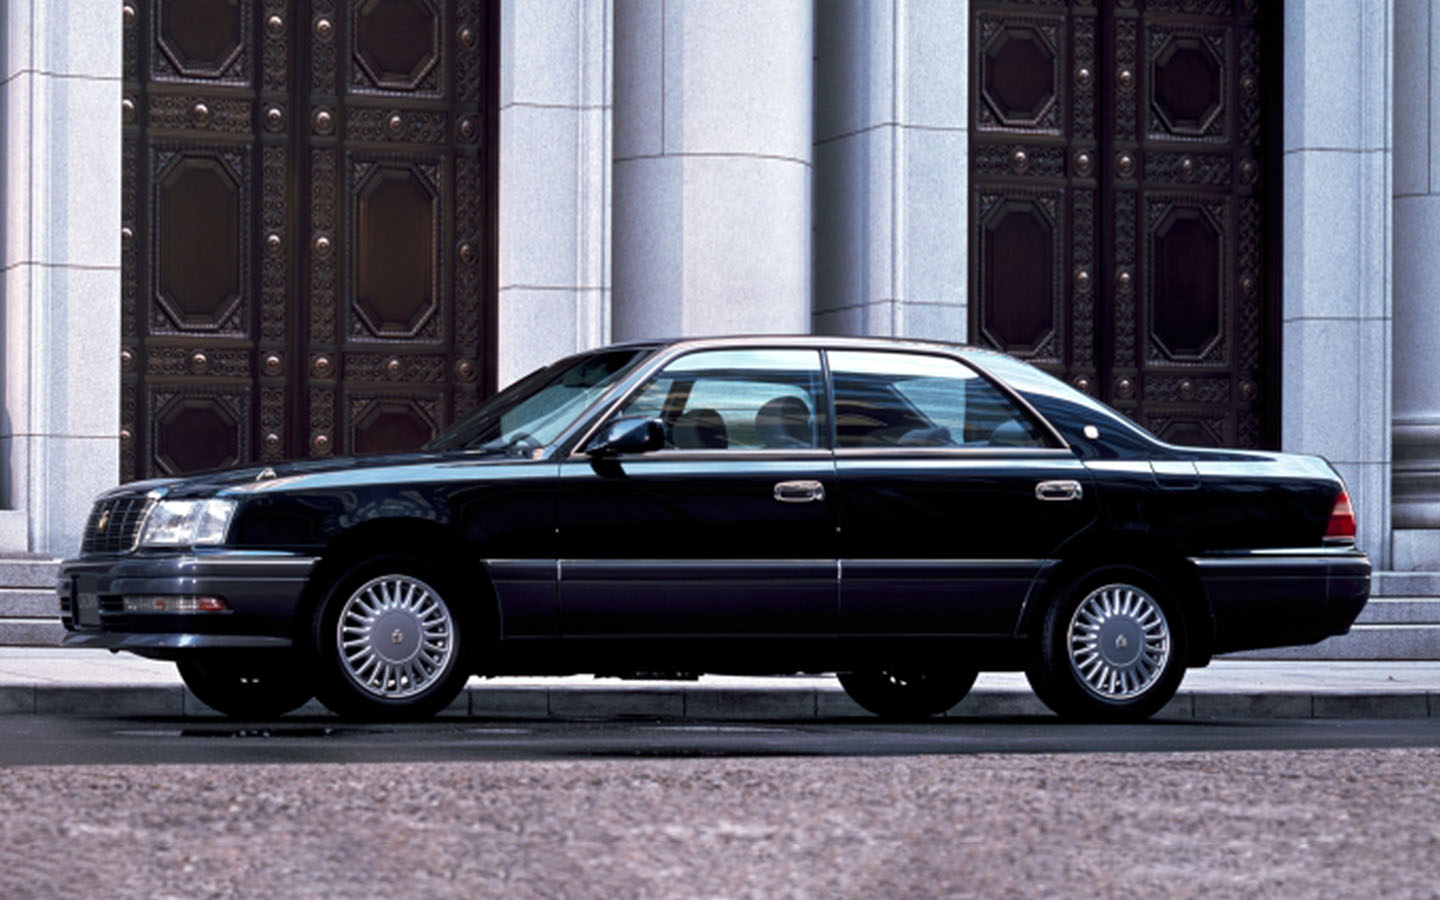 tenth generation Toyota Crown 1995  was available in two body sizes